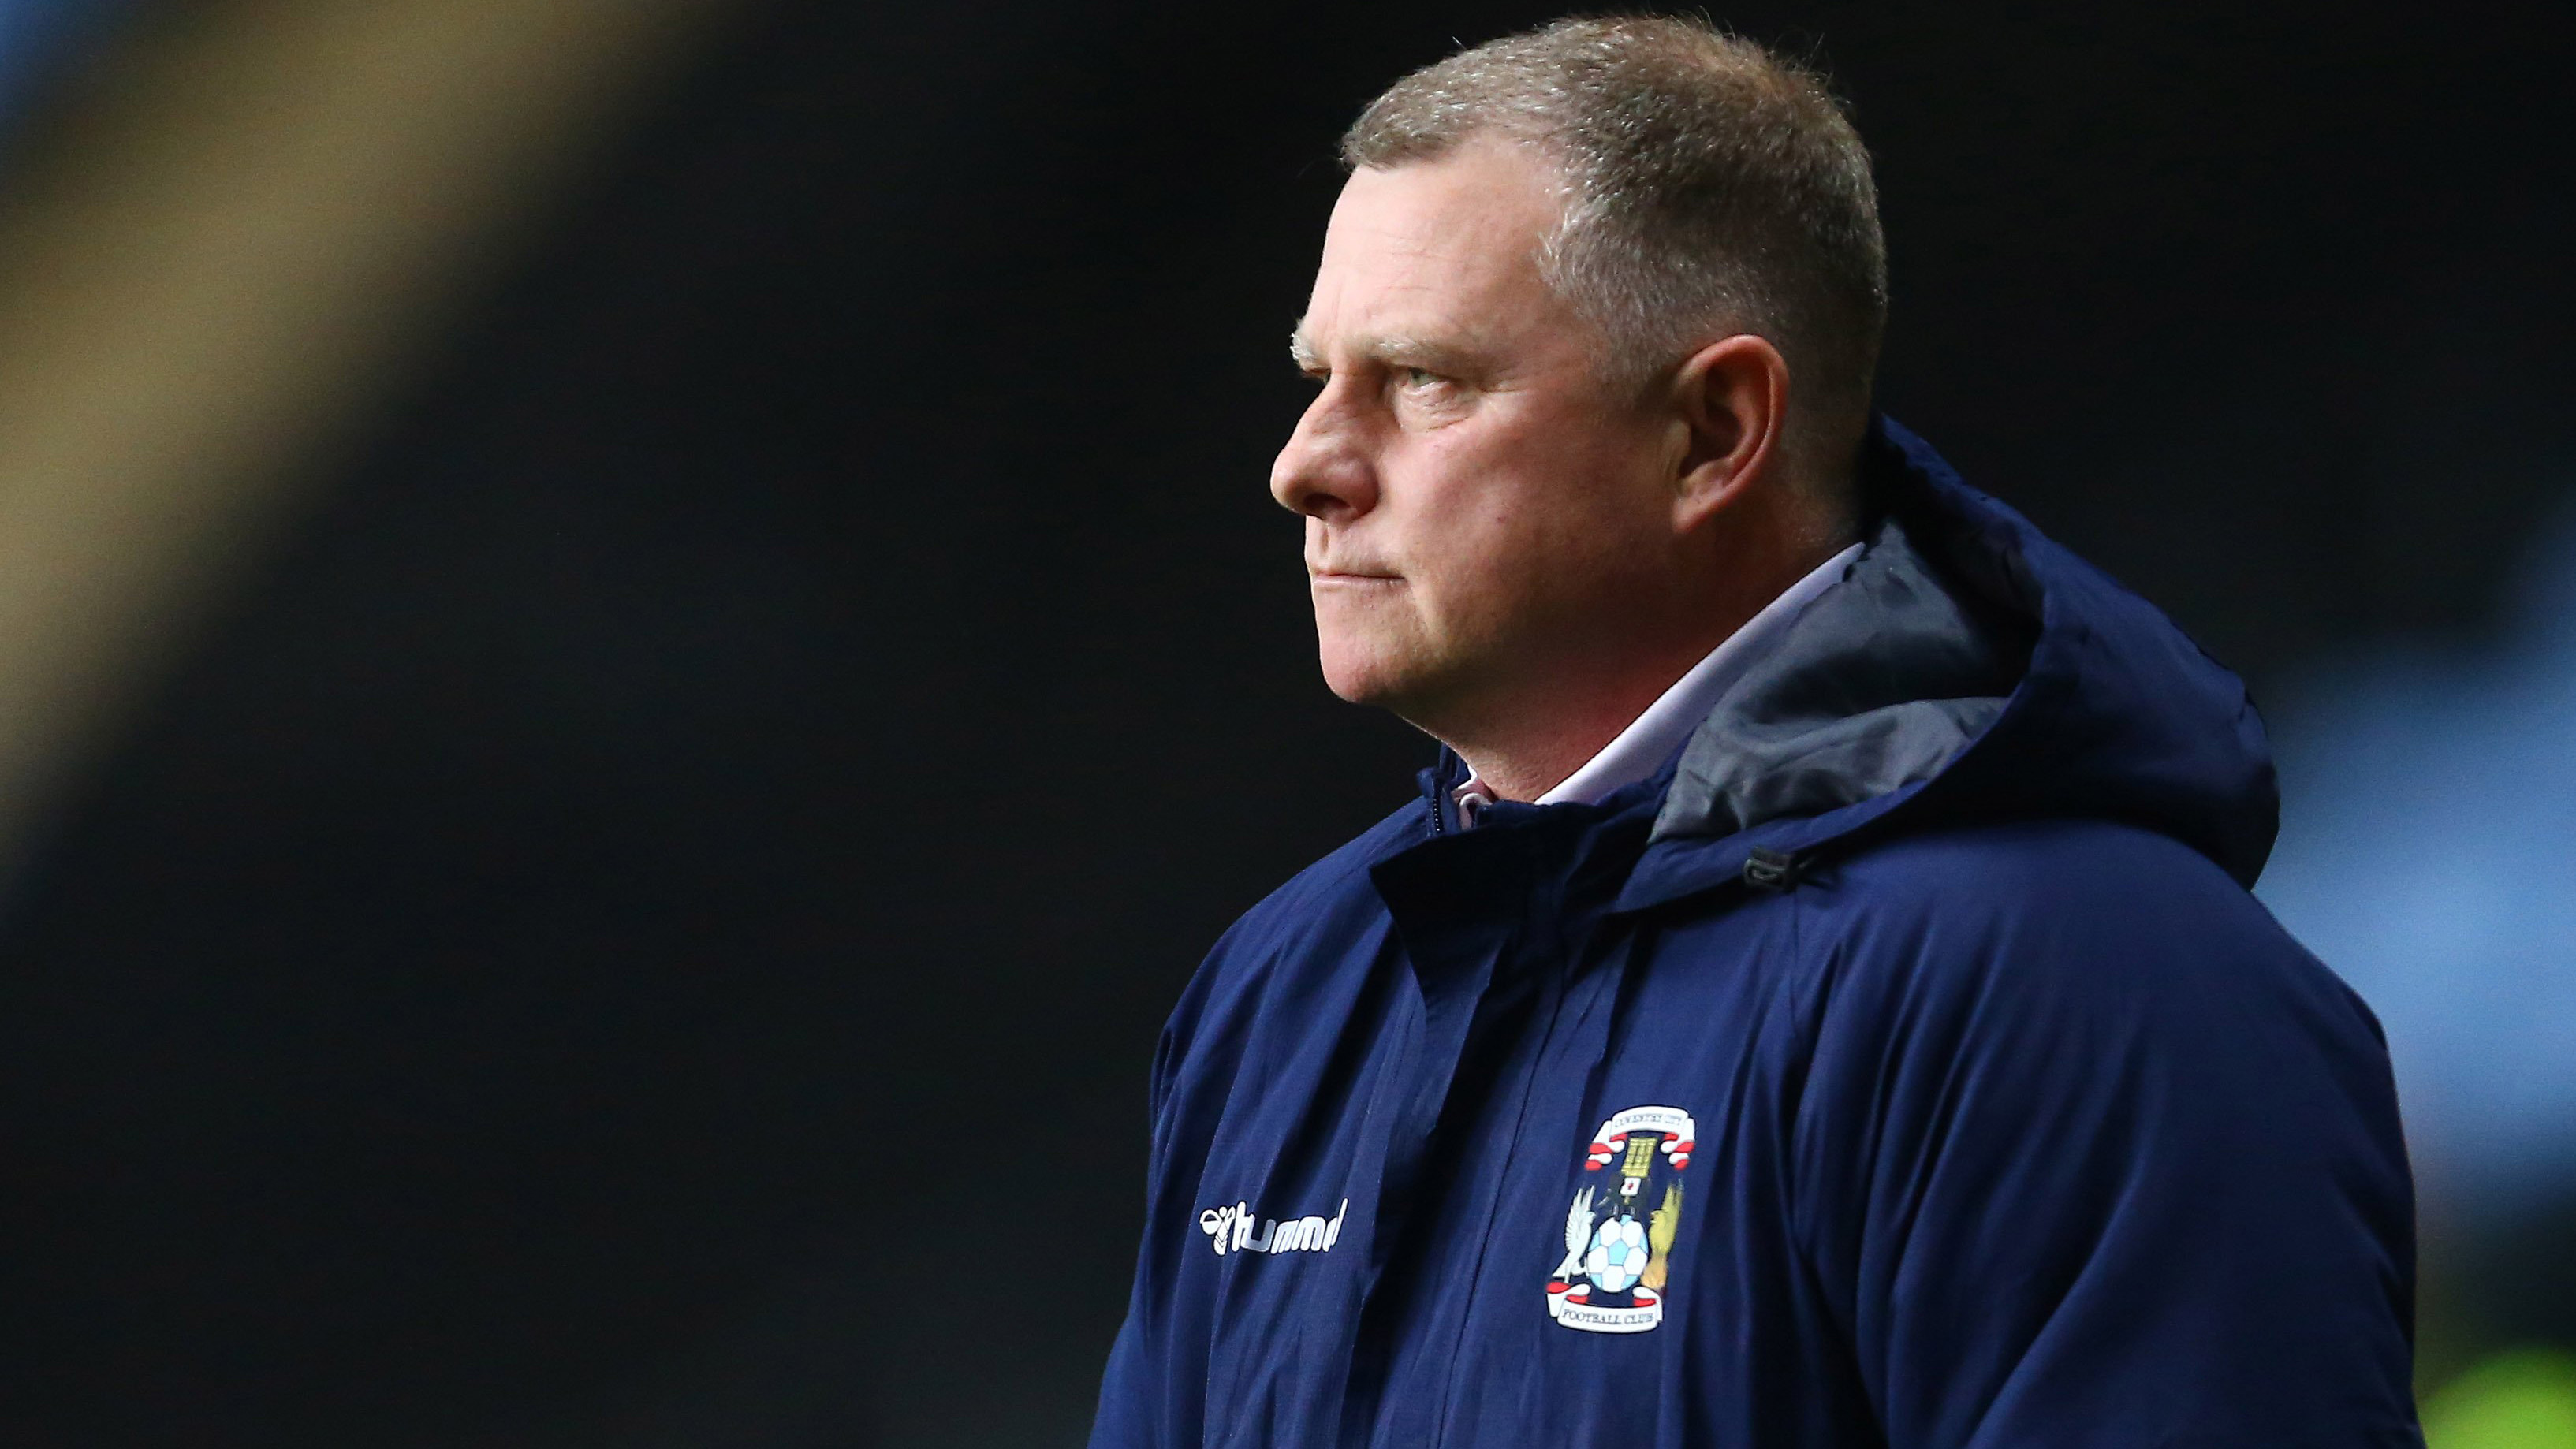 Coventry manager Mark Robins wears club coat while watching his team